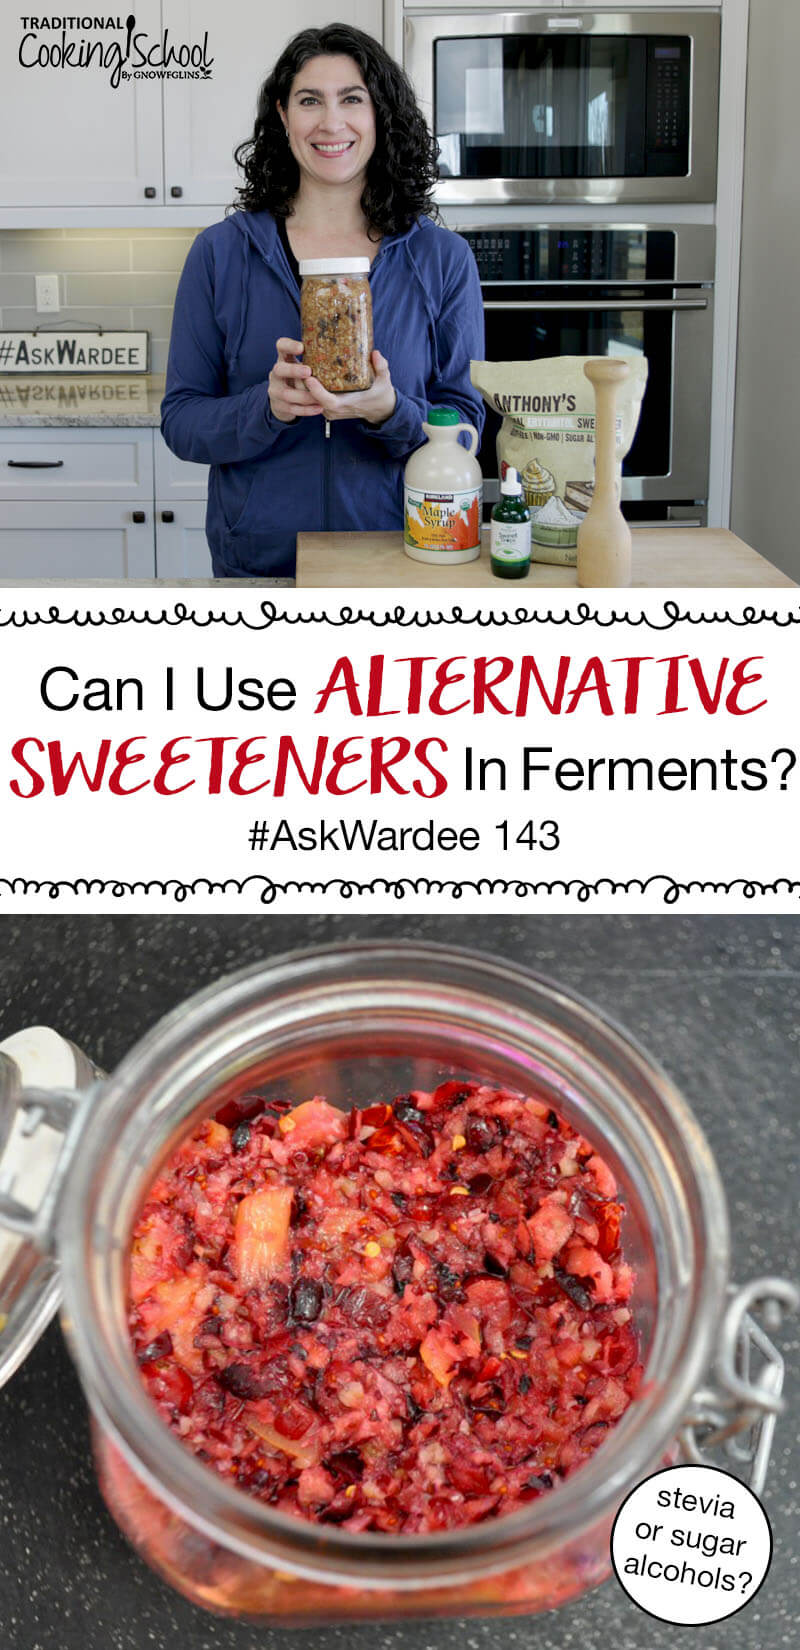 photo collage of a woman in a kitchen holding apple chutney, and a small glass jar of cranberry relish, with text overlay: "Can I Use Alternative Sweeteners In Ferments #AskWardee 143 (stevia or sugar alcohols?)"